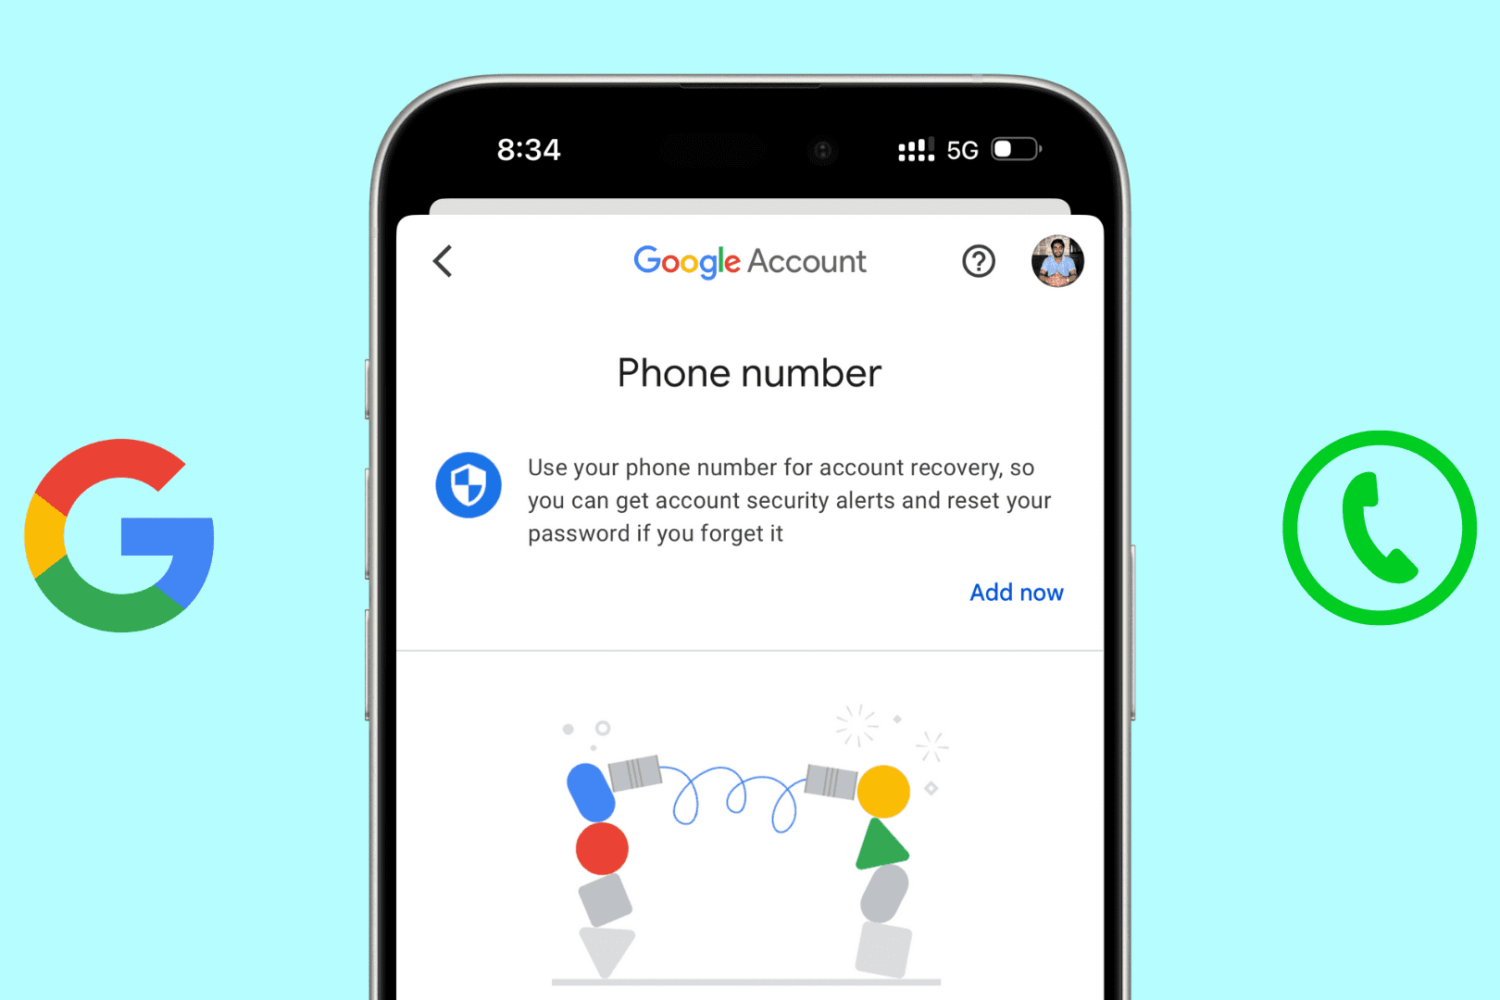 Phone number option in Google Account settings on iPhone